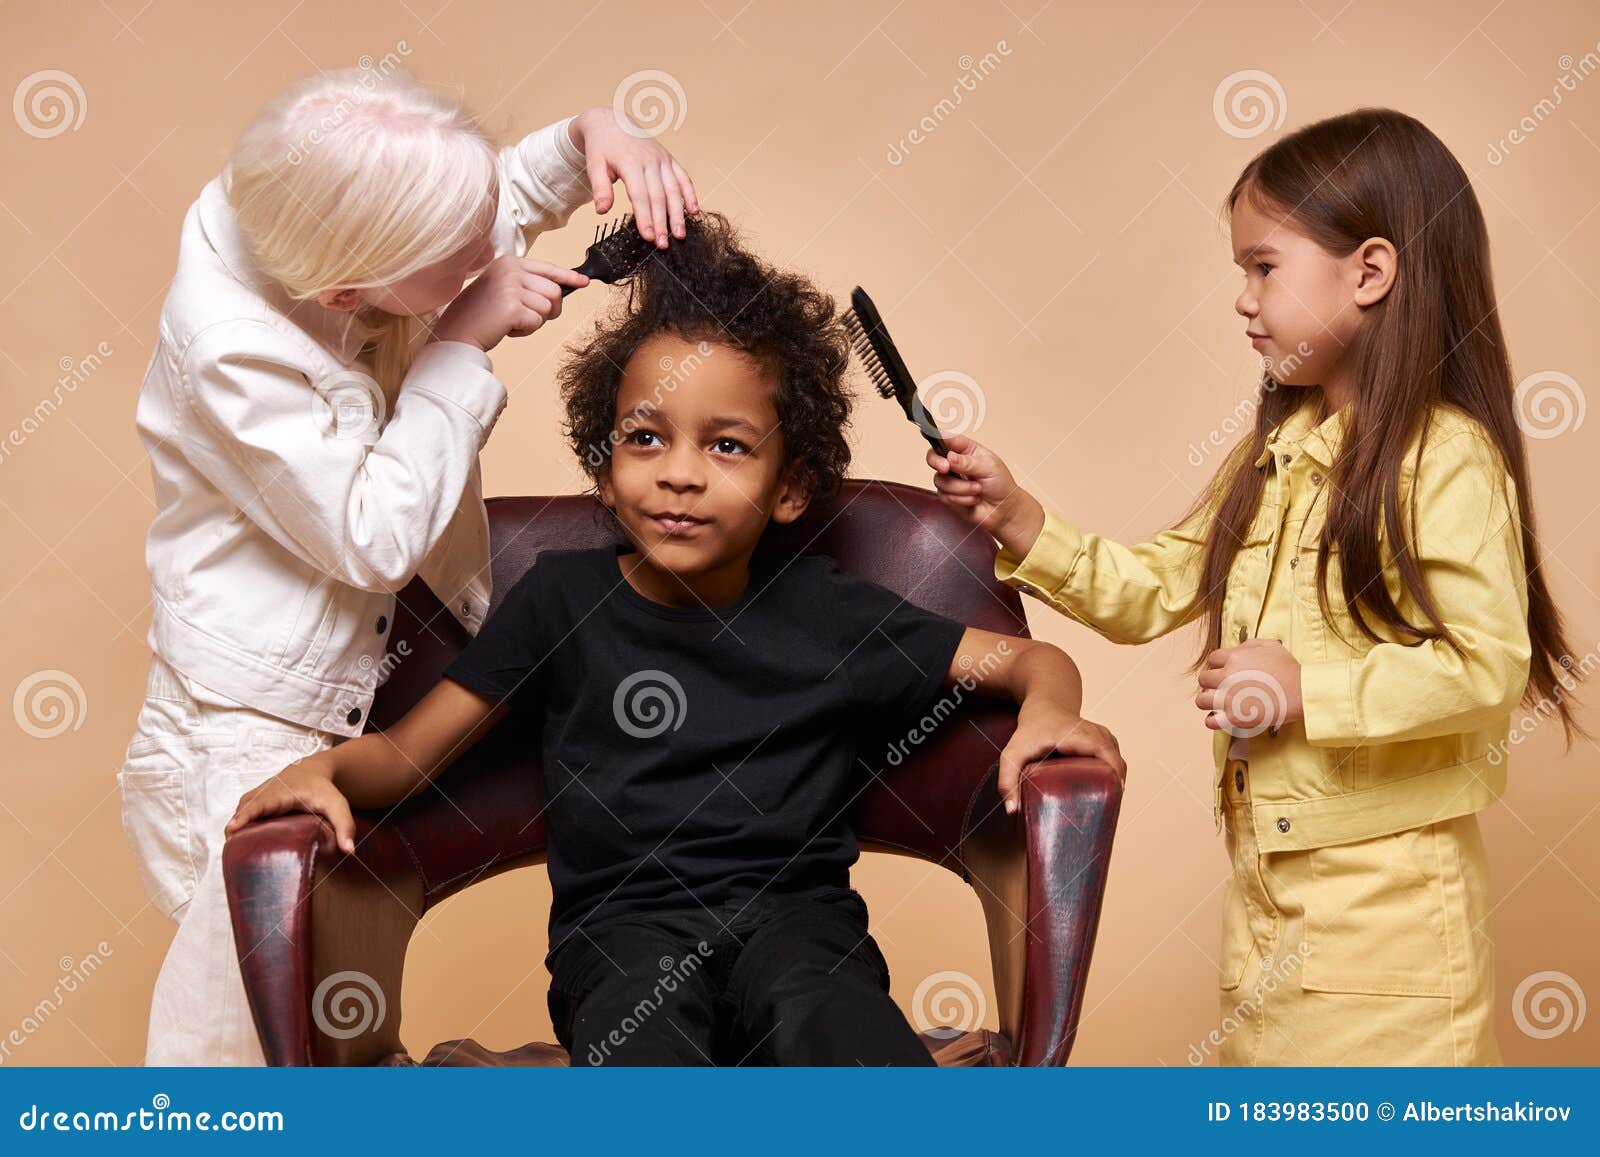 albino child girl combing curly hair of africanamerican boy 